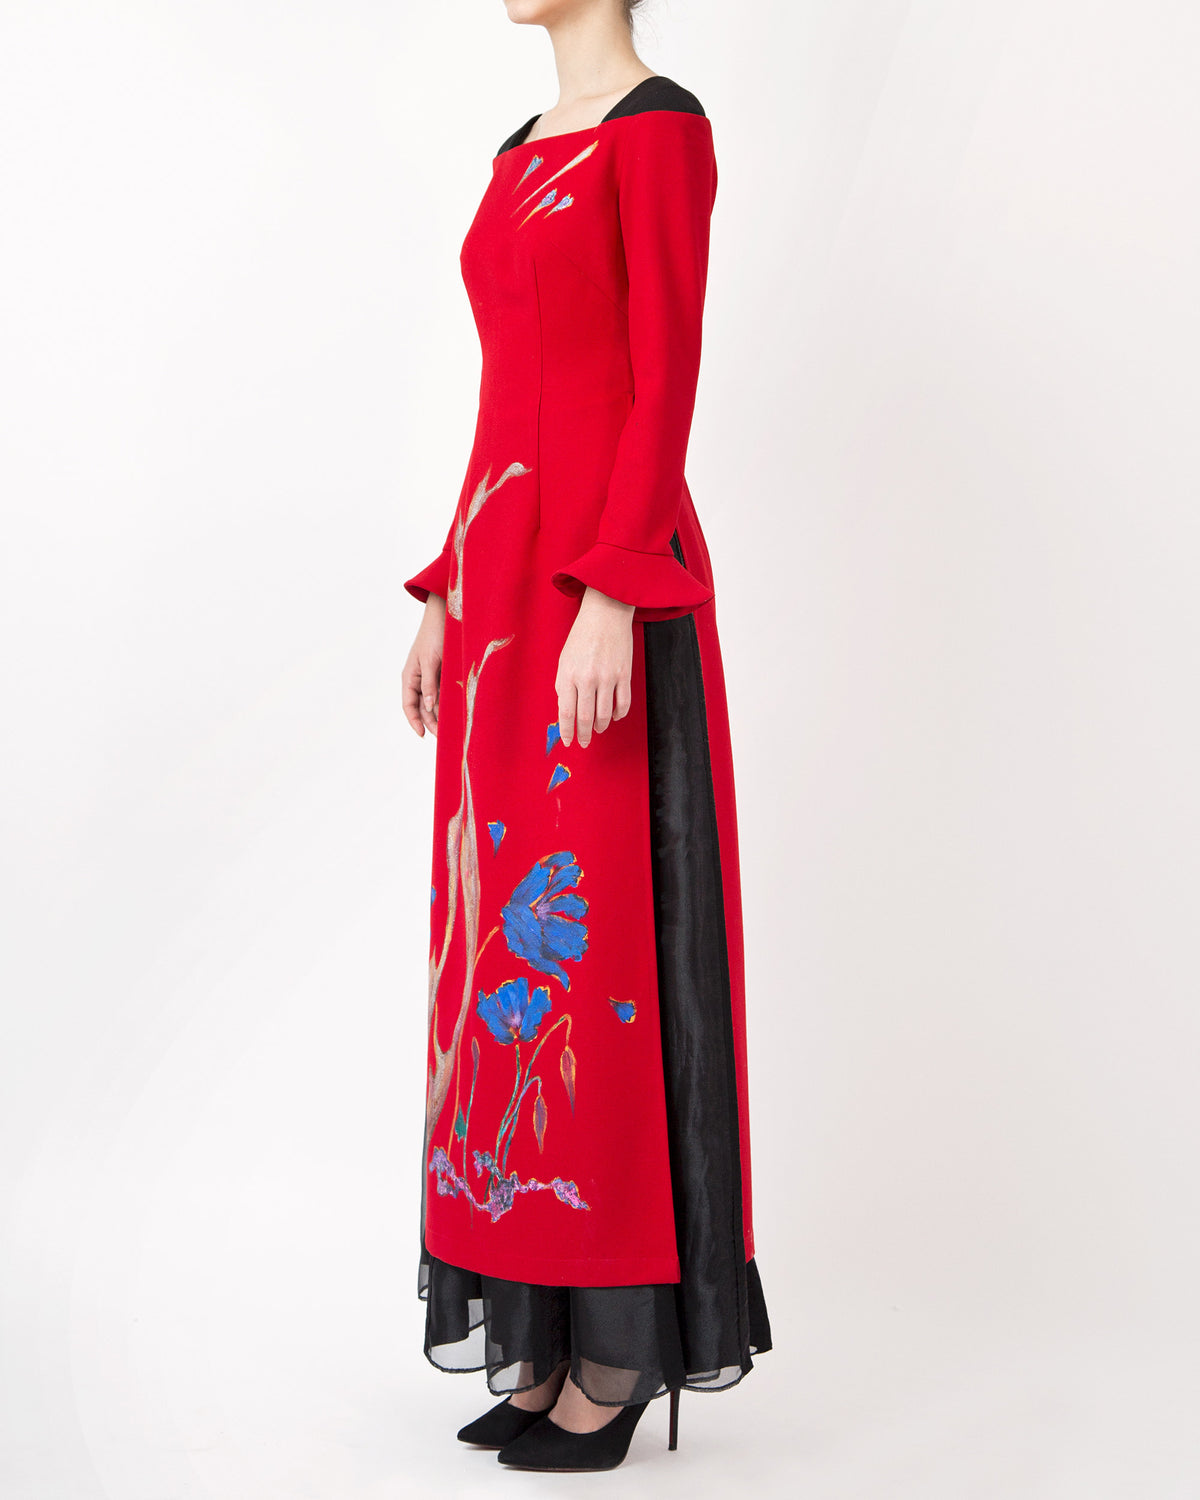 Phoenix in Poppy-painted Circular Cuffs Sleeve Red Contemporary Ao Dai